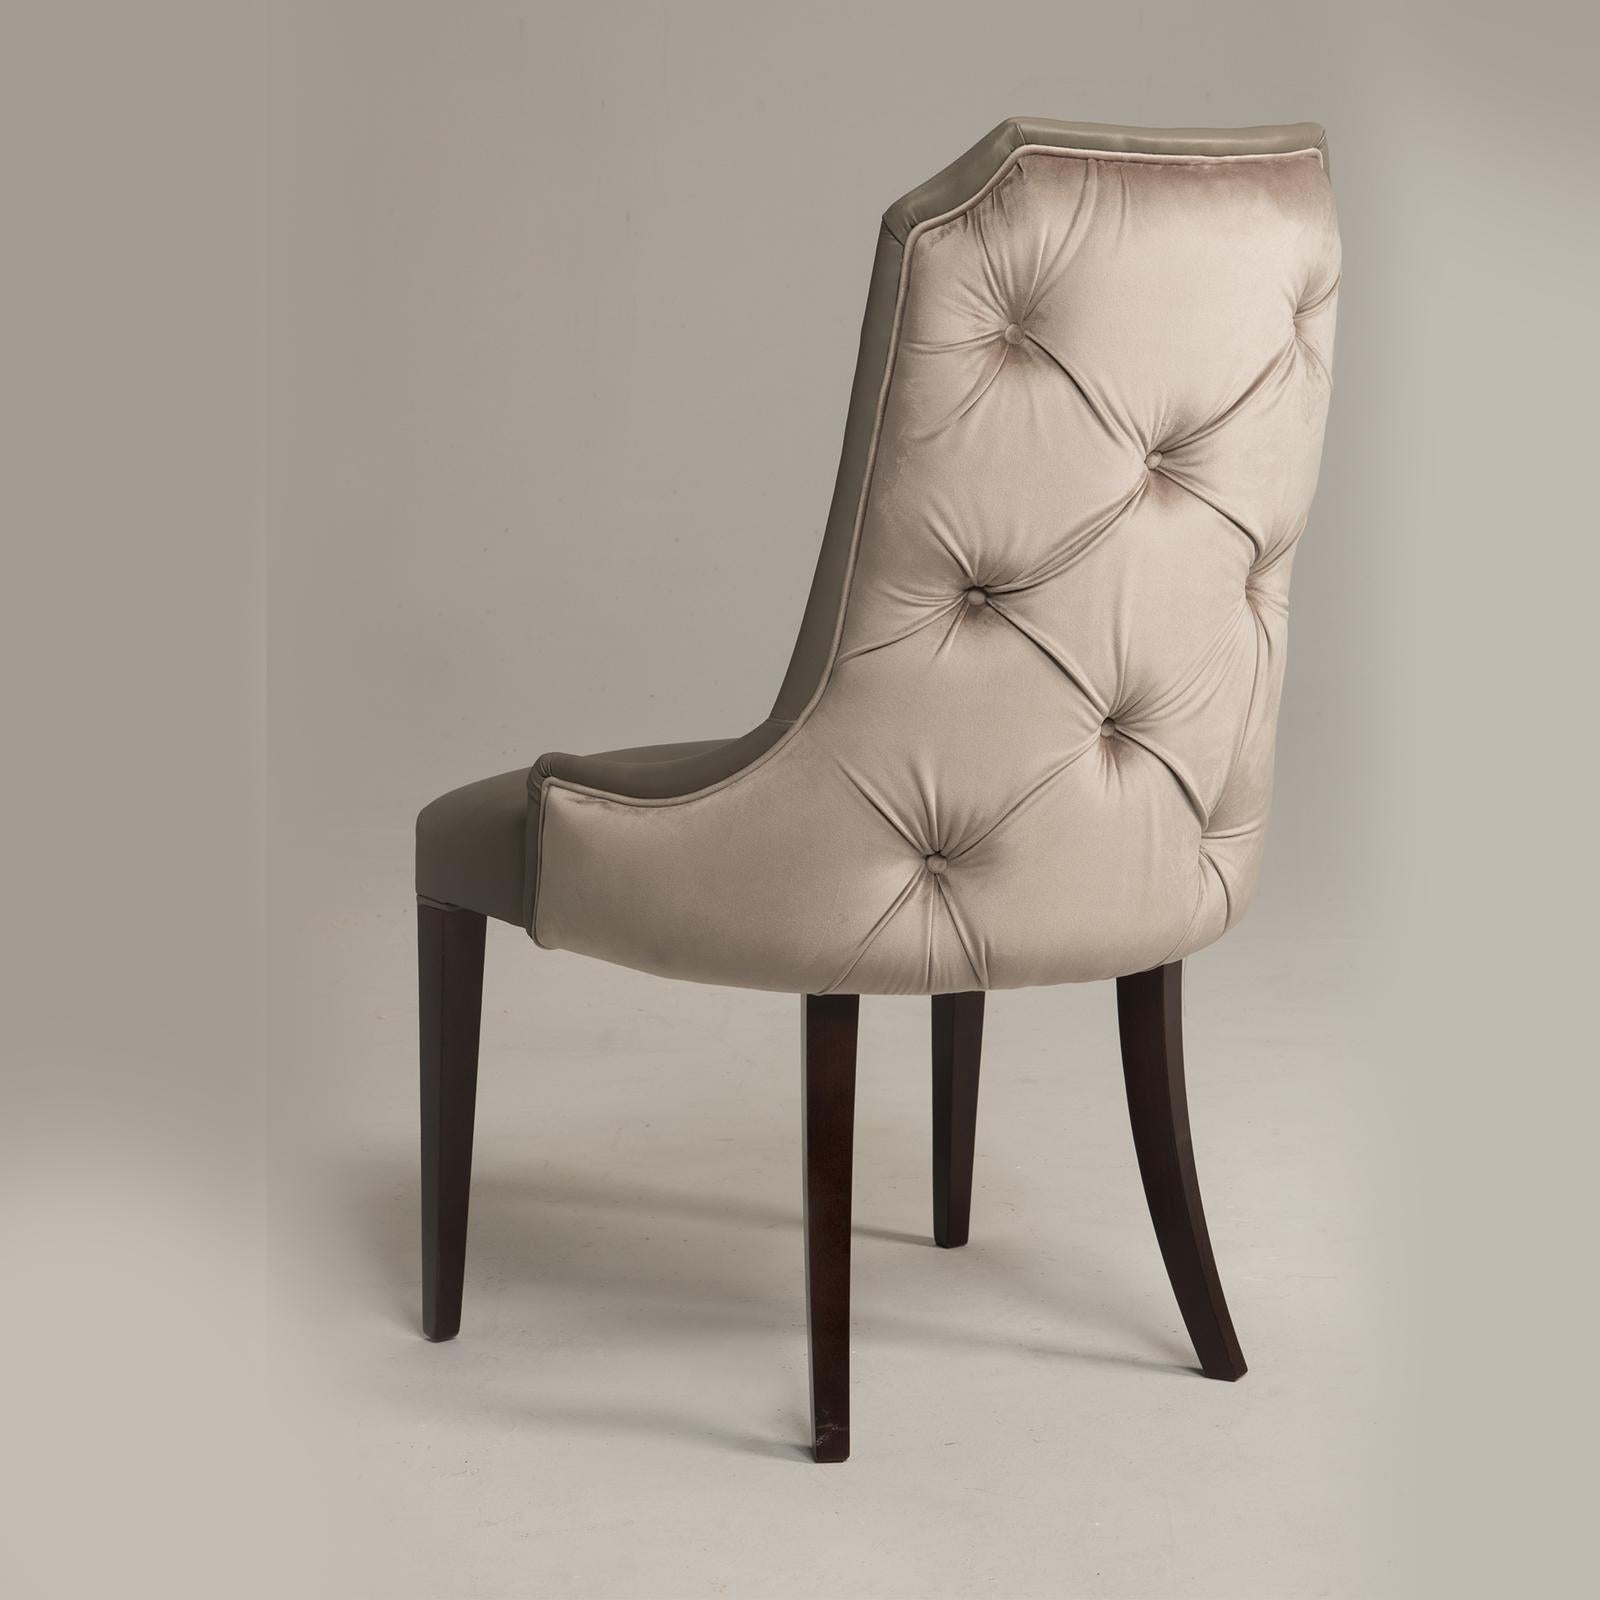 This stylish Oscar collection chair has a splendid design featuring tufted upholstery on the back of the piece. A sophisticated addition to any decor with a contemporary and elegant flavor, the chair combines tradition and modernity with deluxe